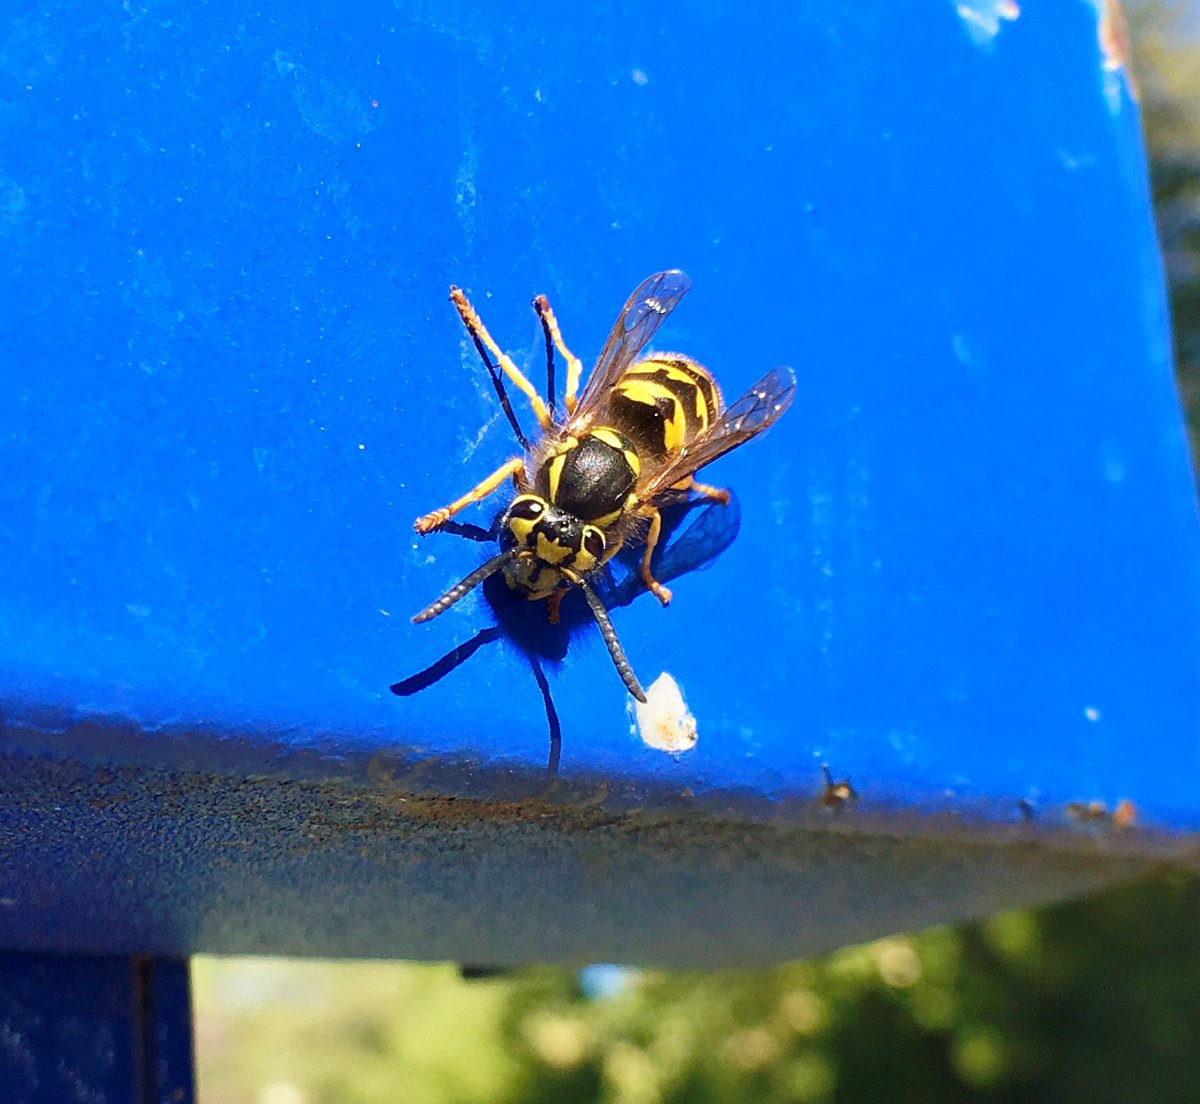 Wasps are out in numbers in Regina this season.